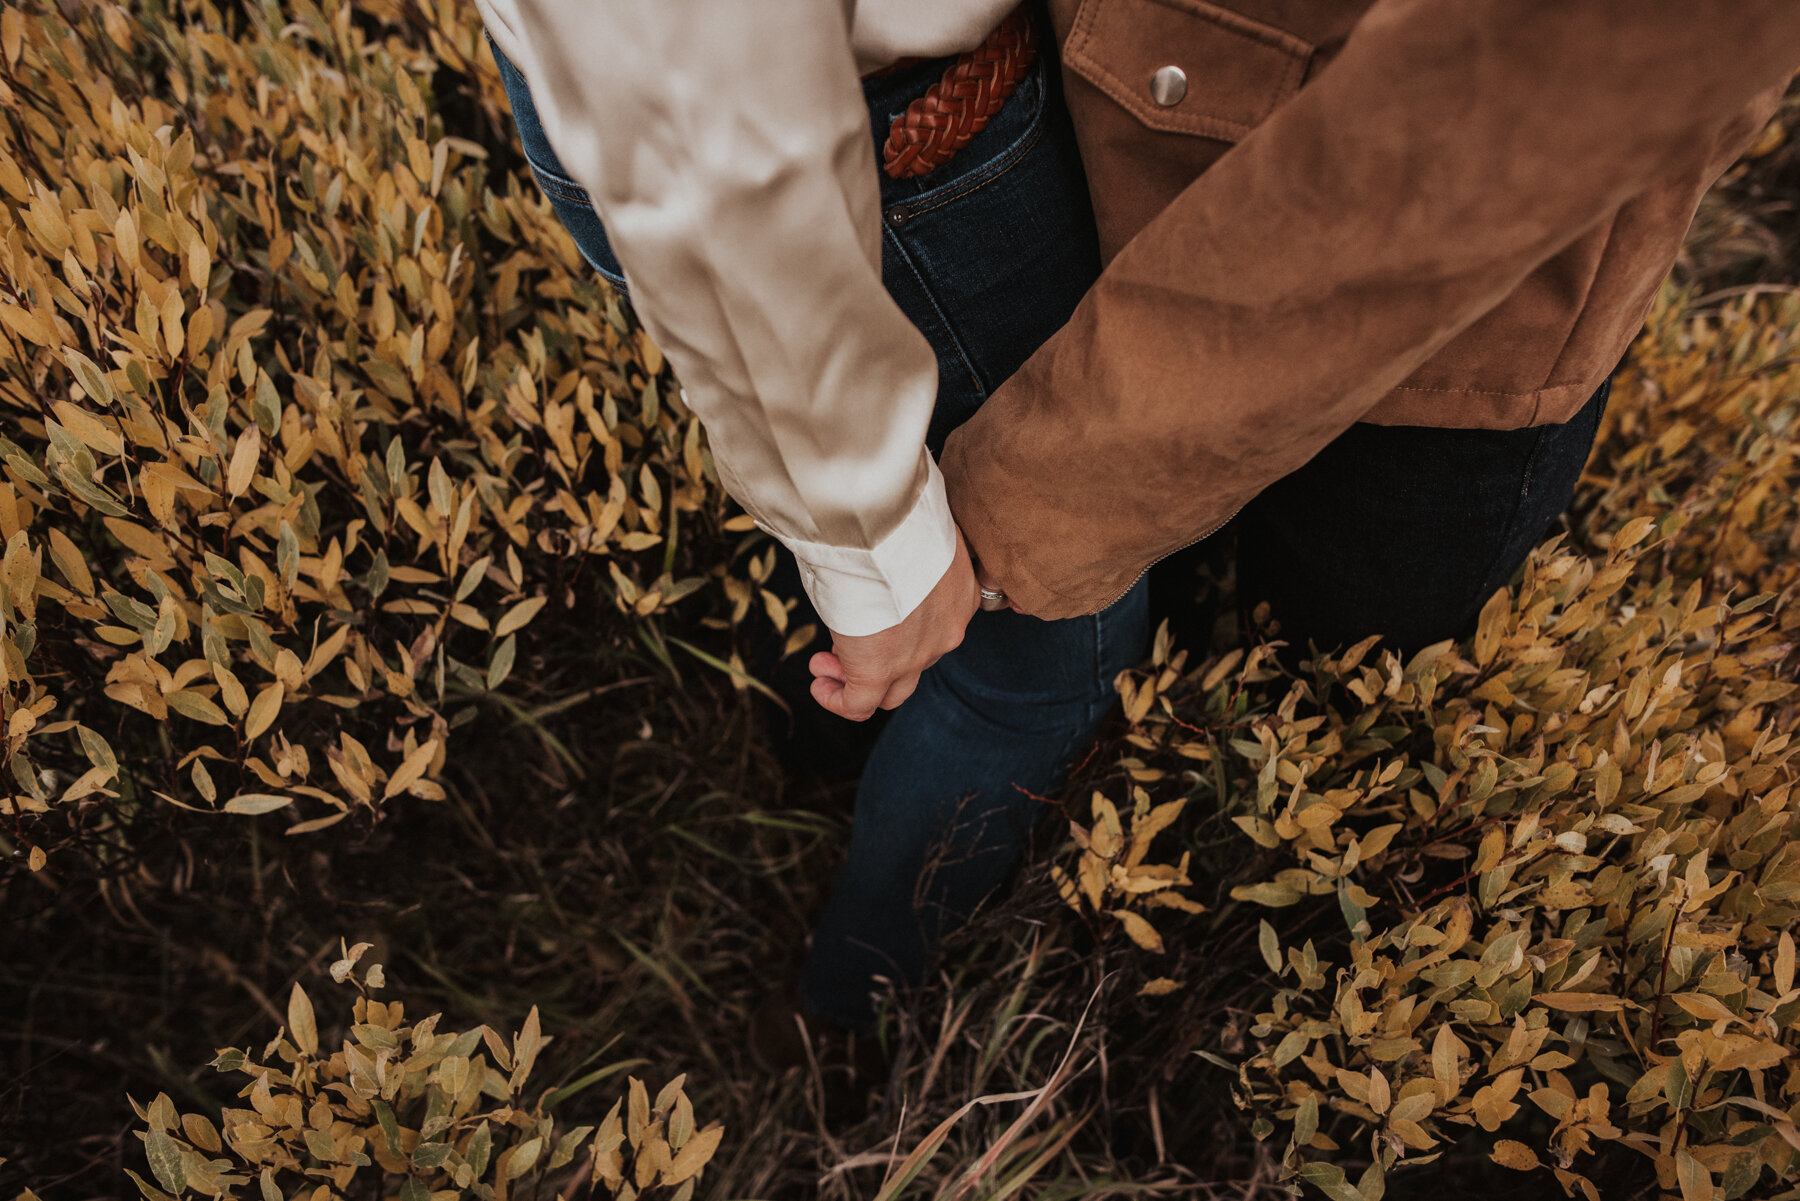 Best Locations in Colorado for Engagement photos